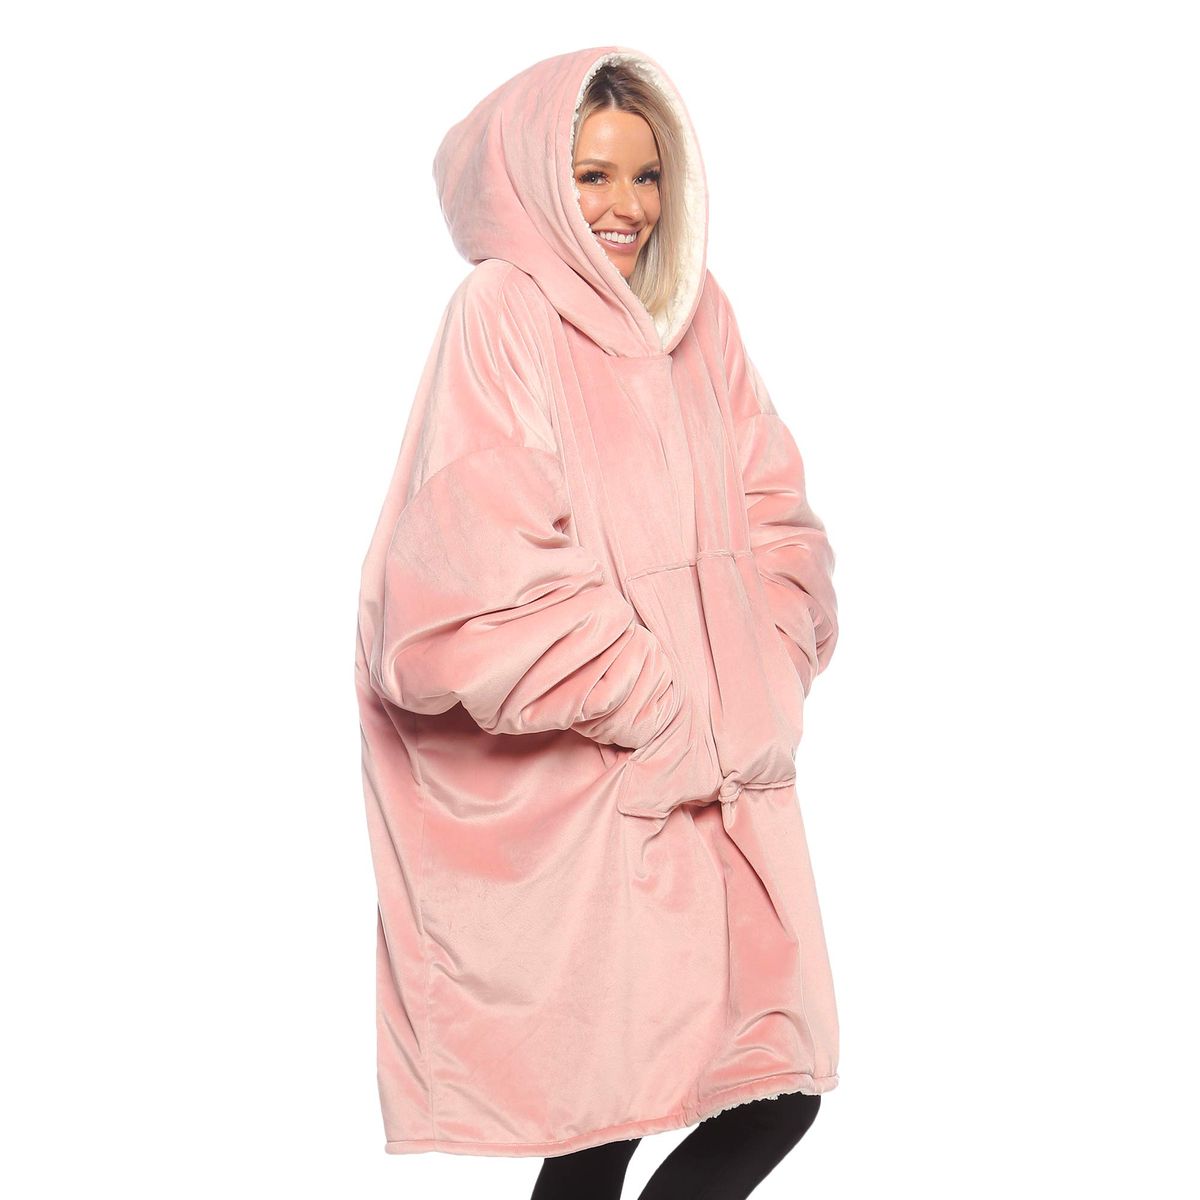 Hoodie Ultra Plush Blanket, One Size - Pink | Shop Today. Get it ...